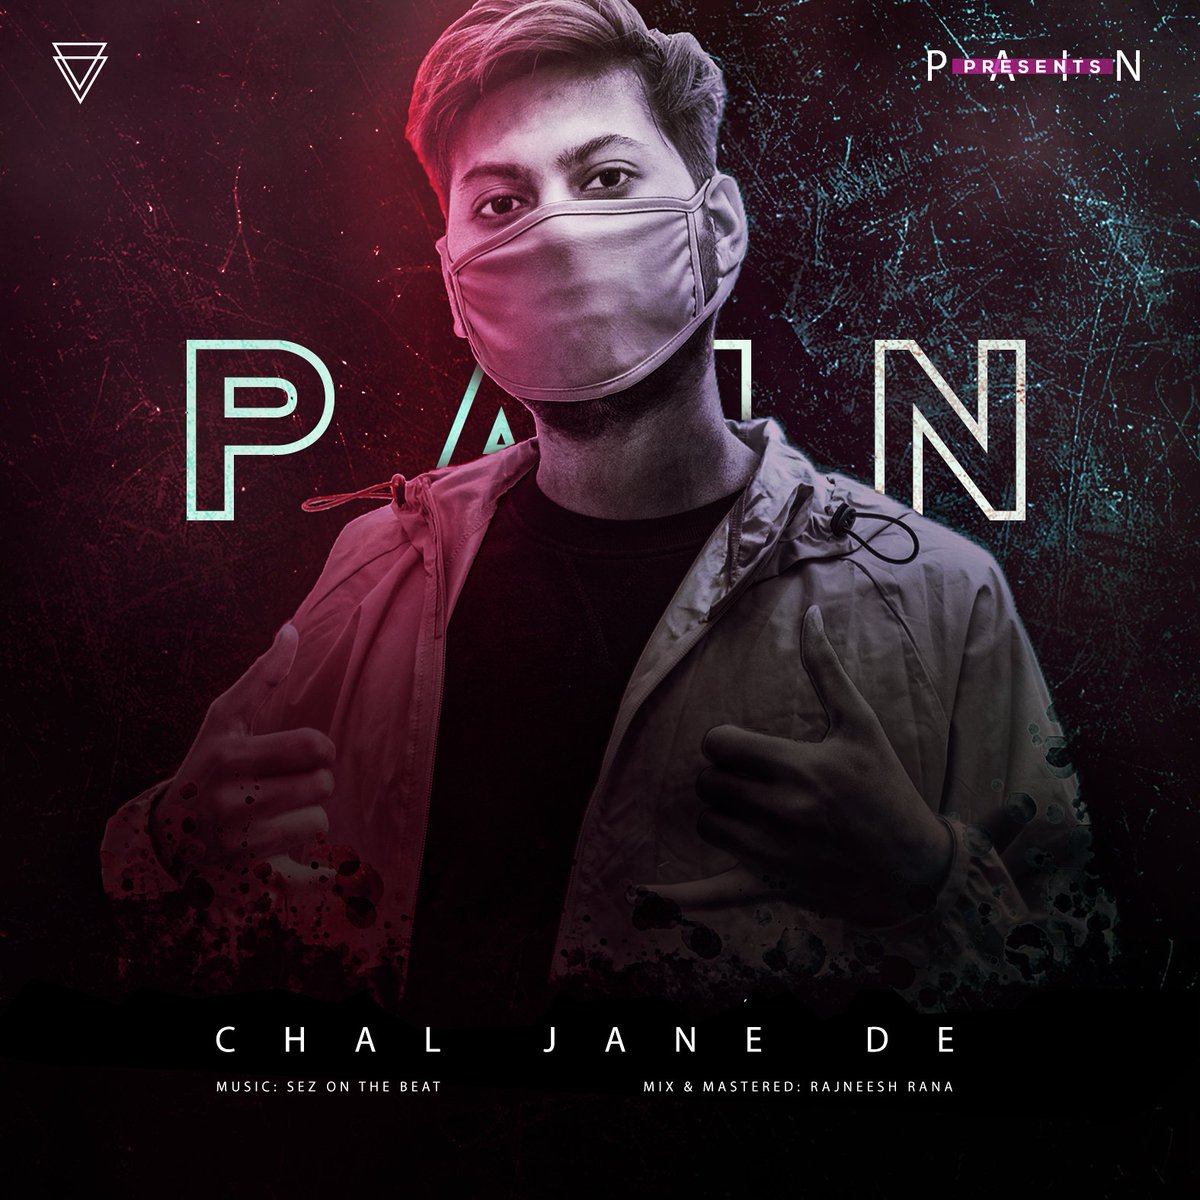 'Chal Jane De' will be out on 28.12.2020 music - @sezonthebeat mix & master - @iamrajneeshrana poster - @social_ad_films